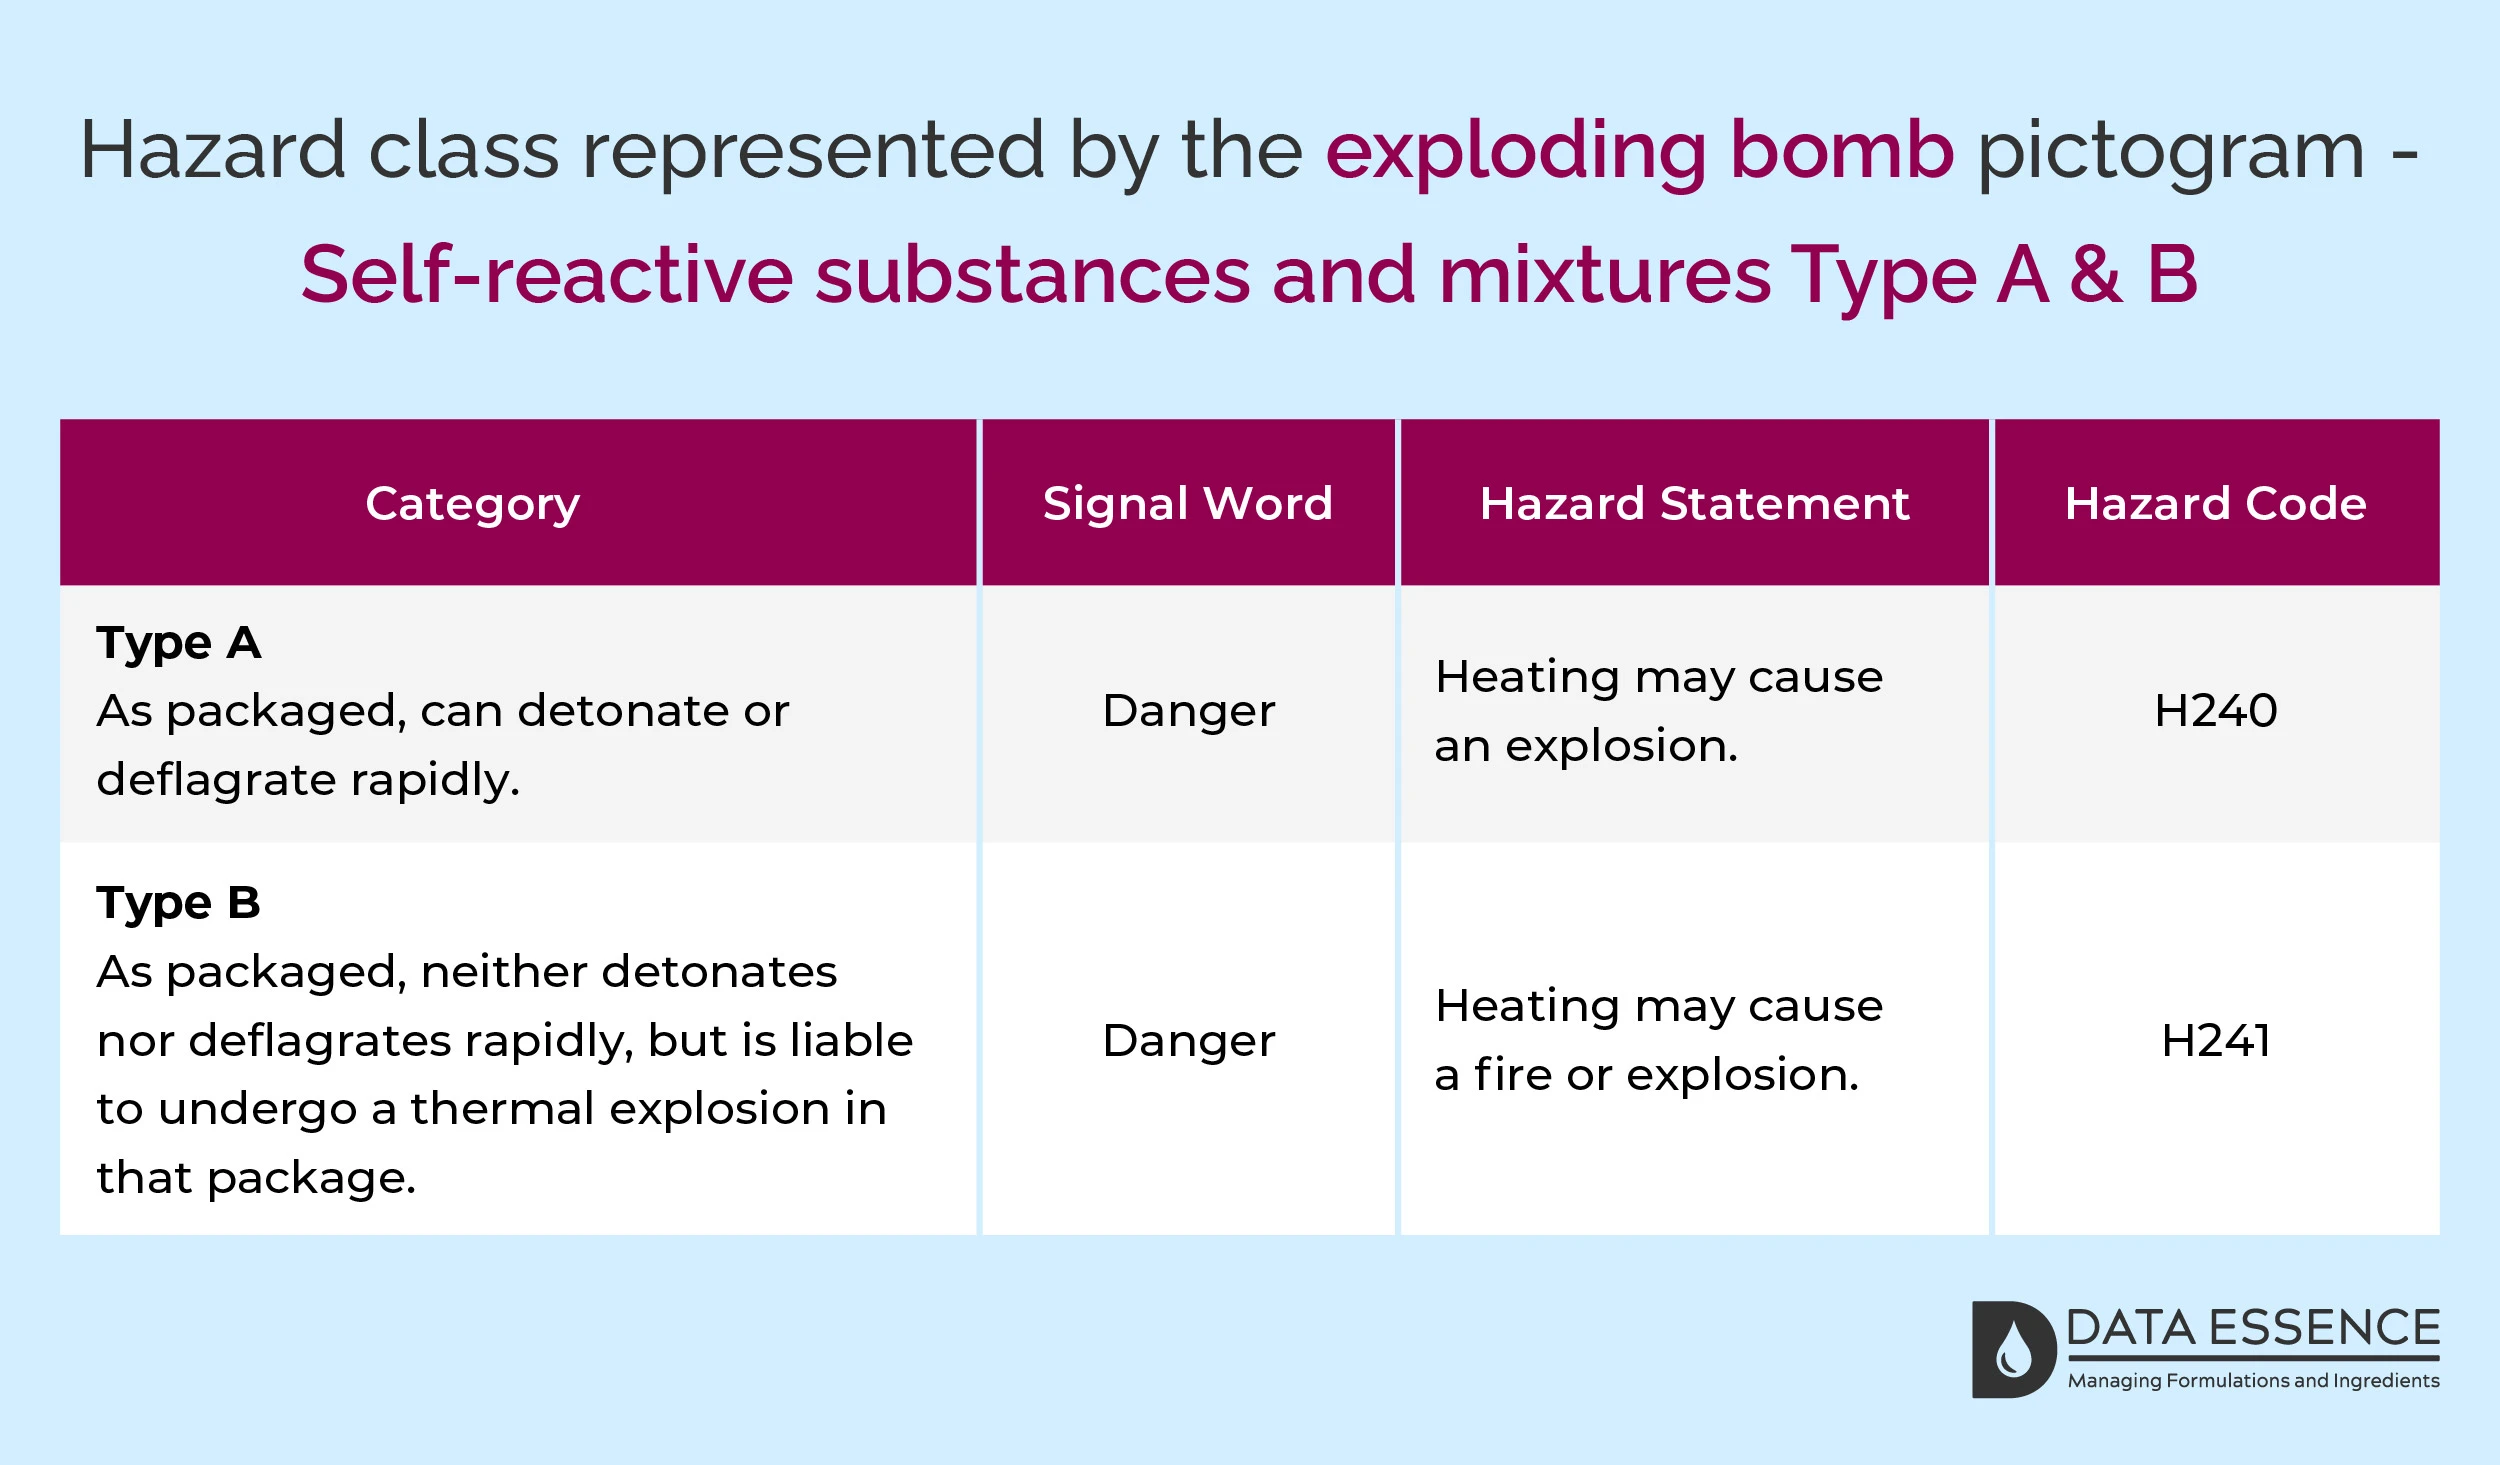 Hazard class represented by the exploding bomb pictogram - Self-reactive substances and mixtures Type A & B